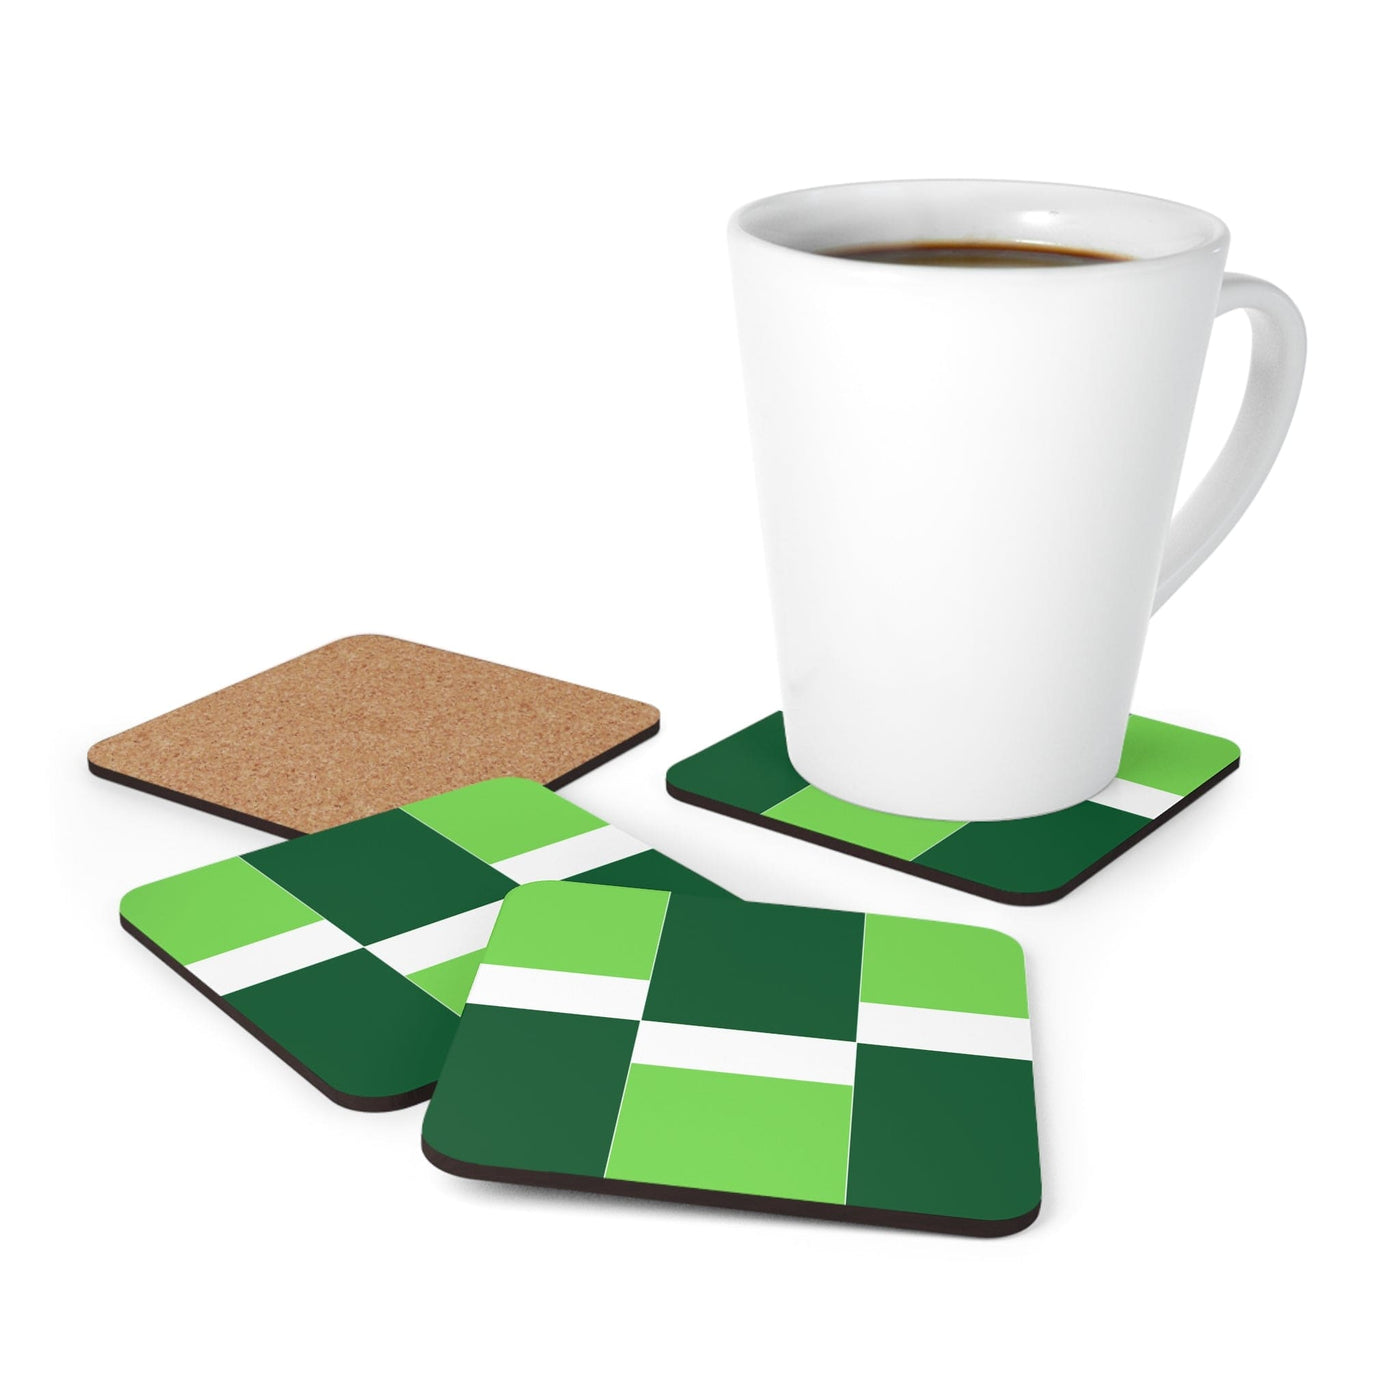 Coaster Set Of 4 For Drinks Lime Forest Irish Green Colorblock - Decorative